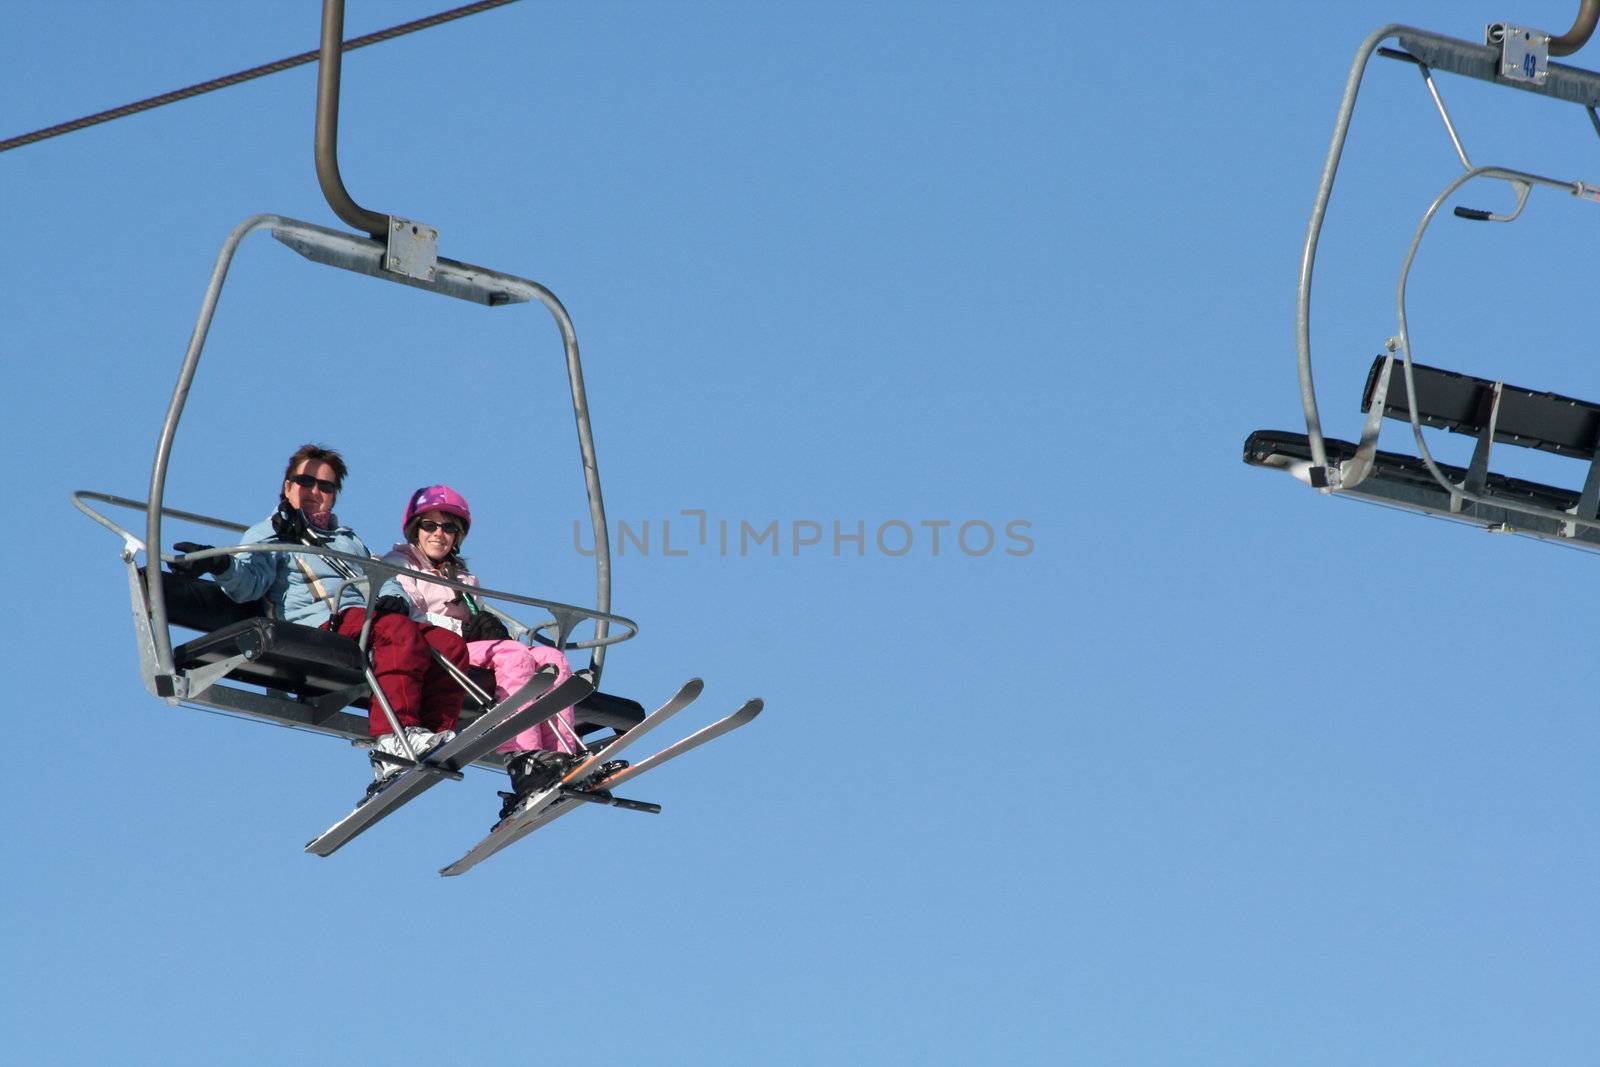 Flying high on the Ski lift by groomee